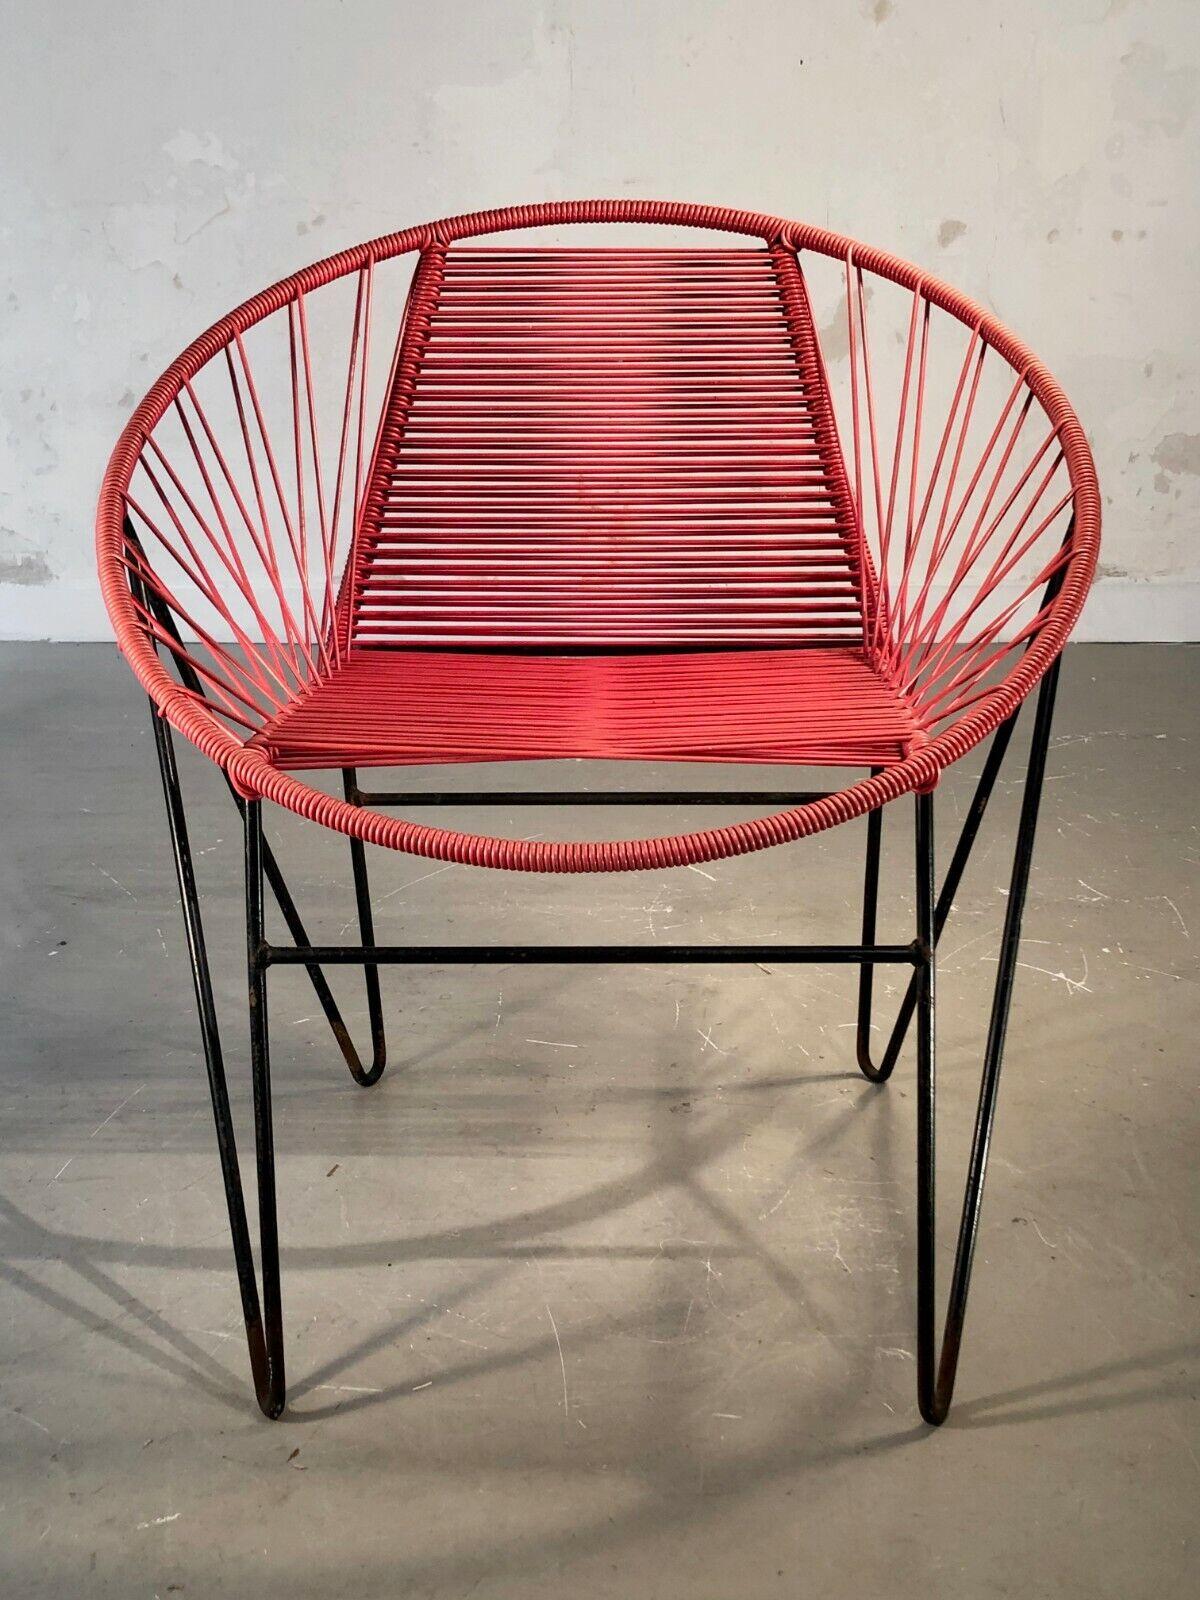 A MID-CENTURY-MODERN MODERNIST CHAIR Attributed to RAOUL GUYS, France 1950 For Sale 2